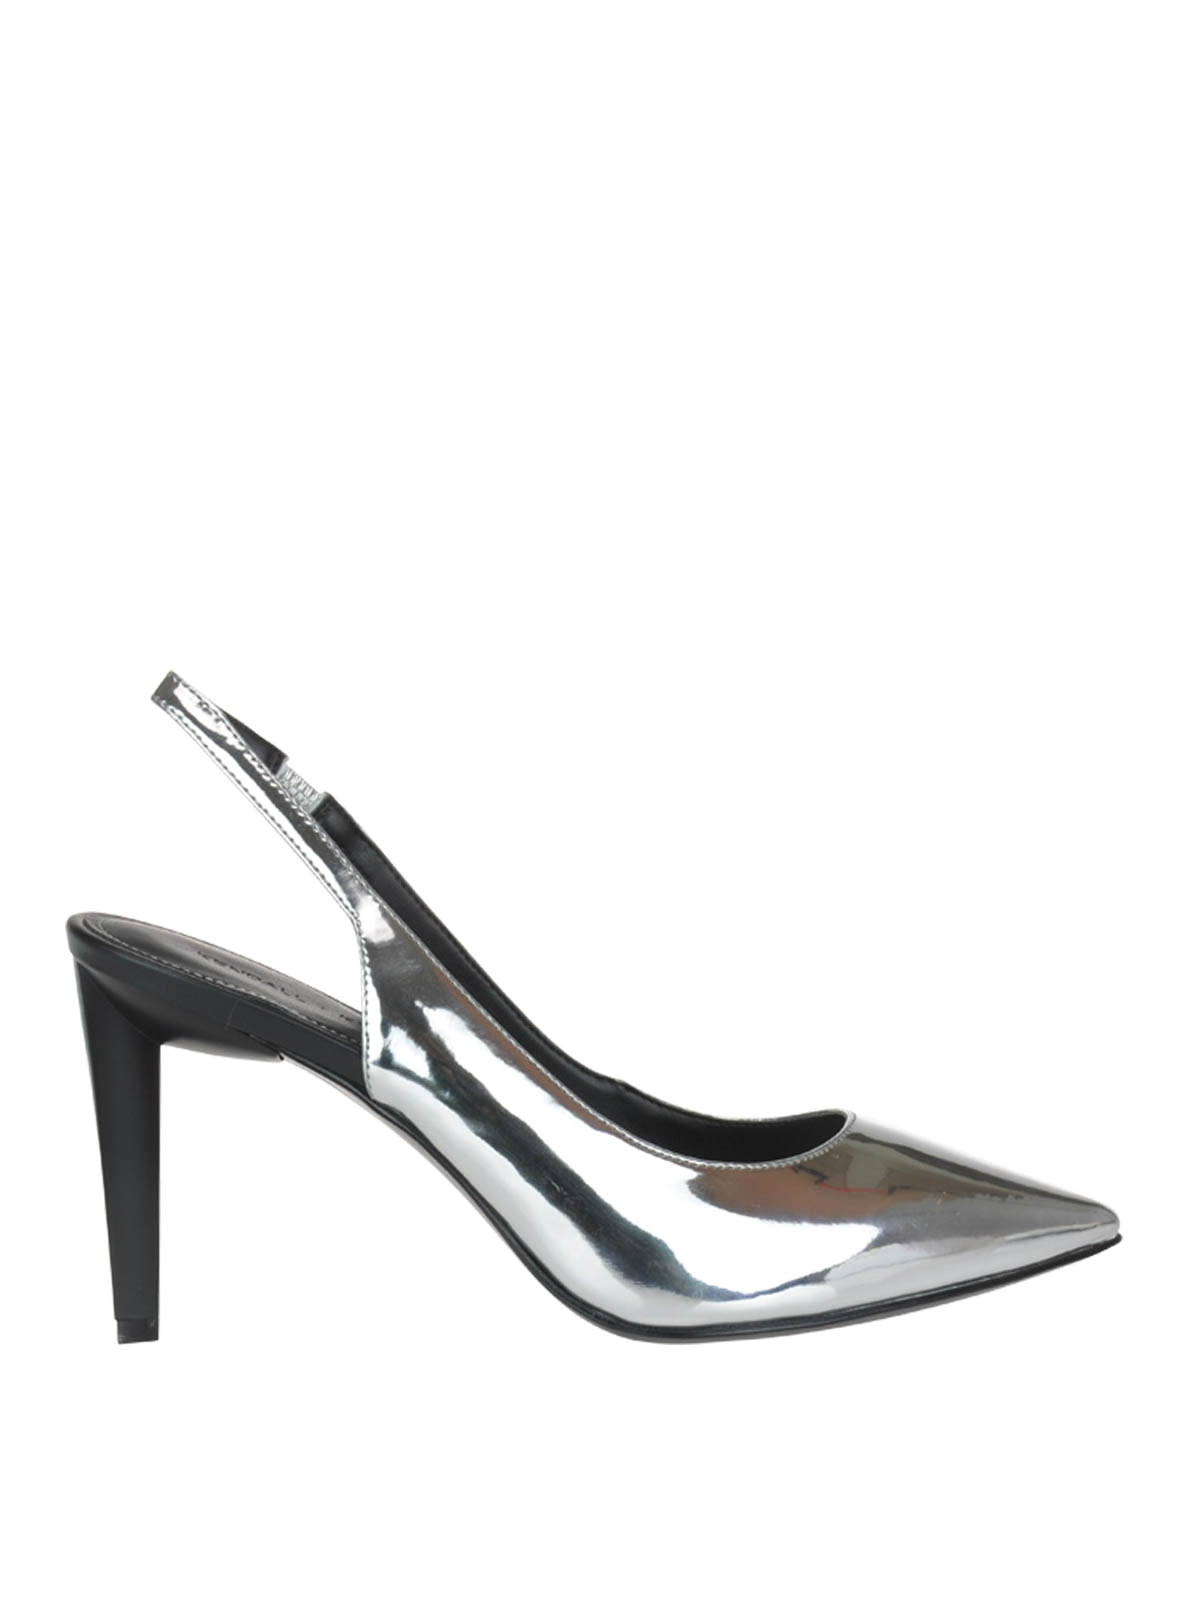 Court shoes Kendall + Kylie - Mora silver patent leather slingbacks ...